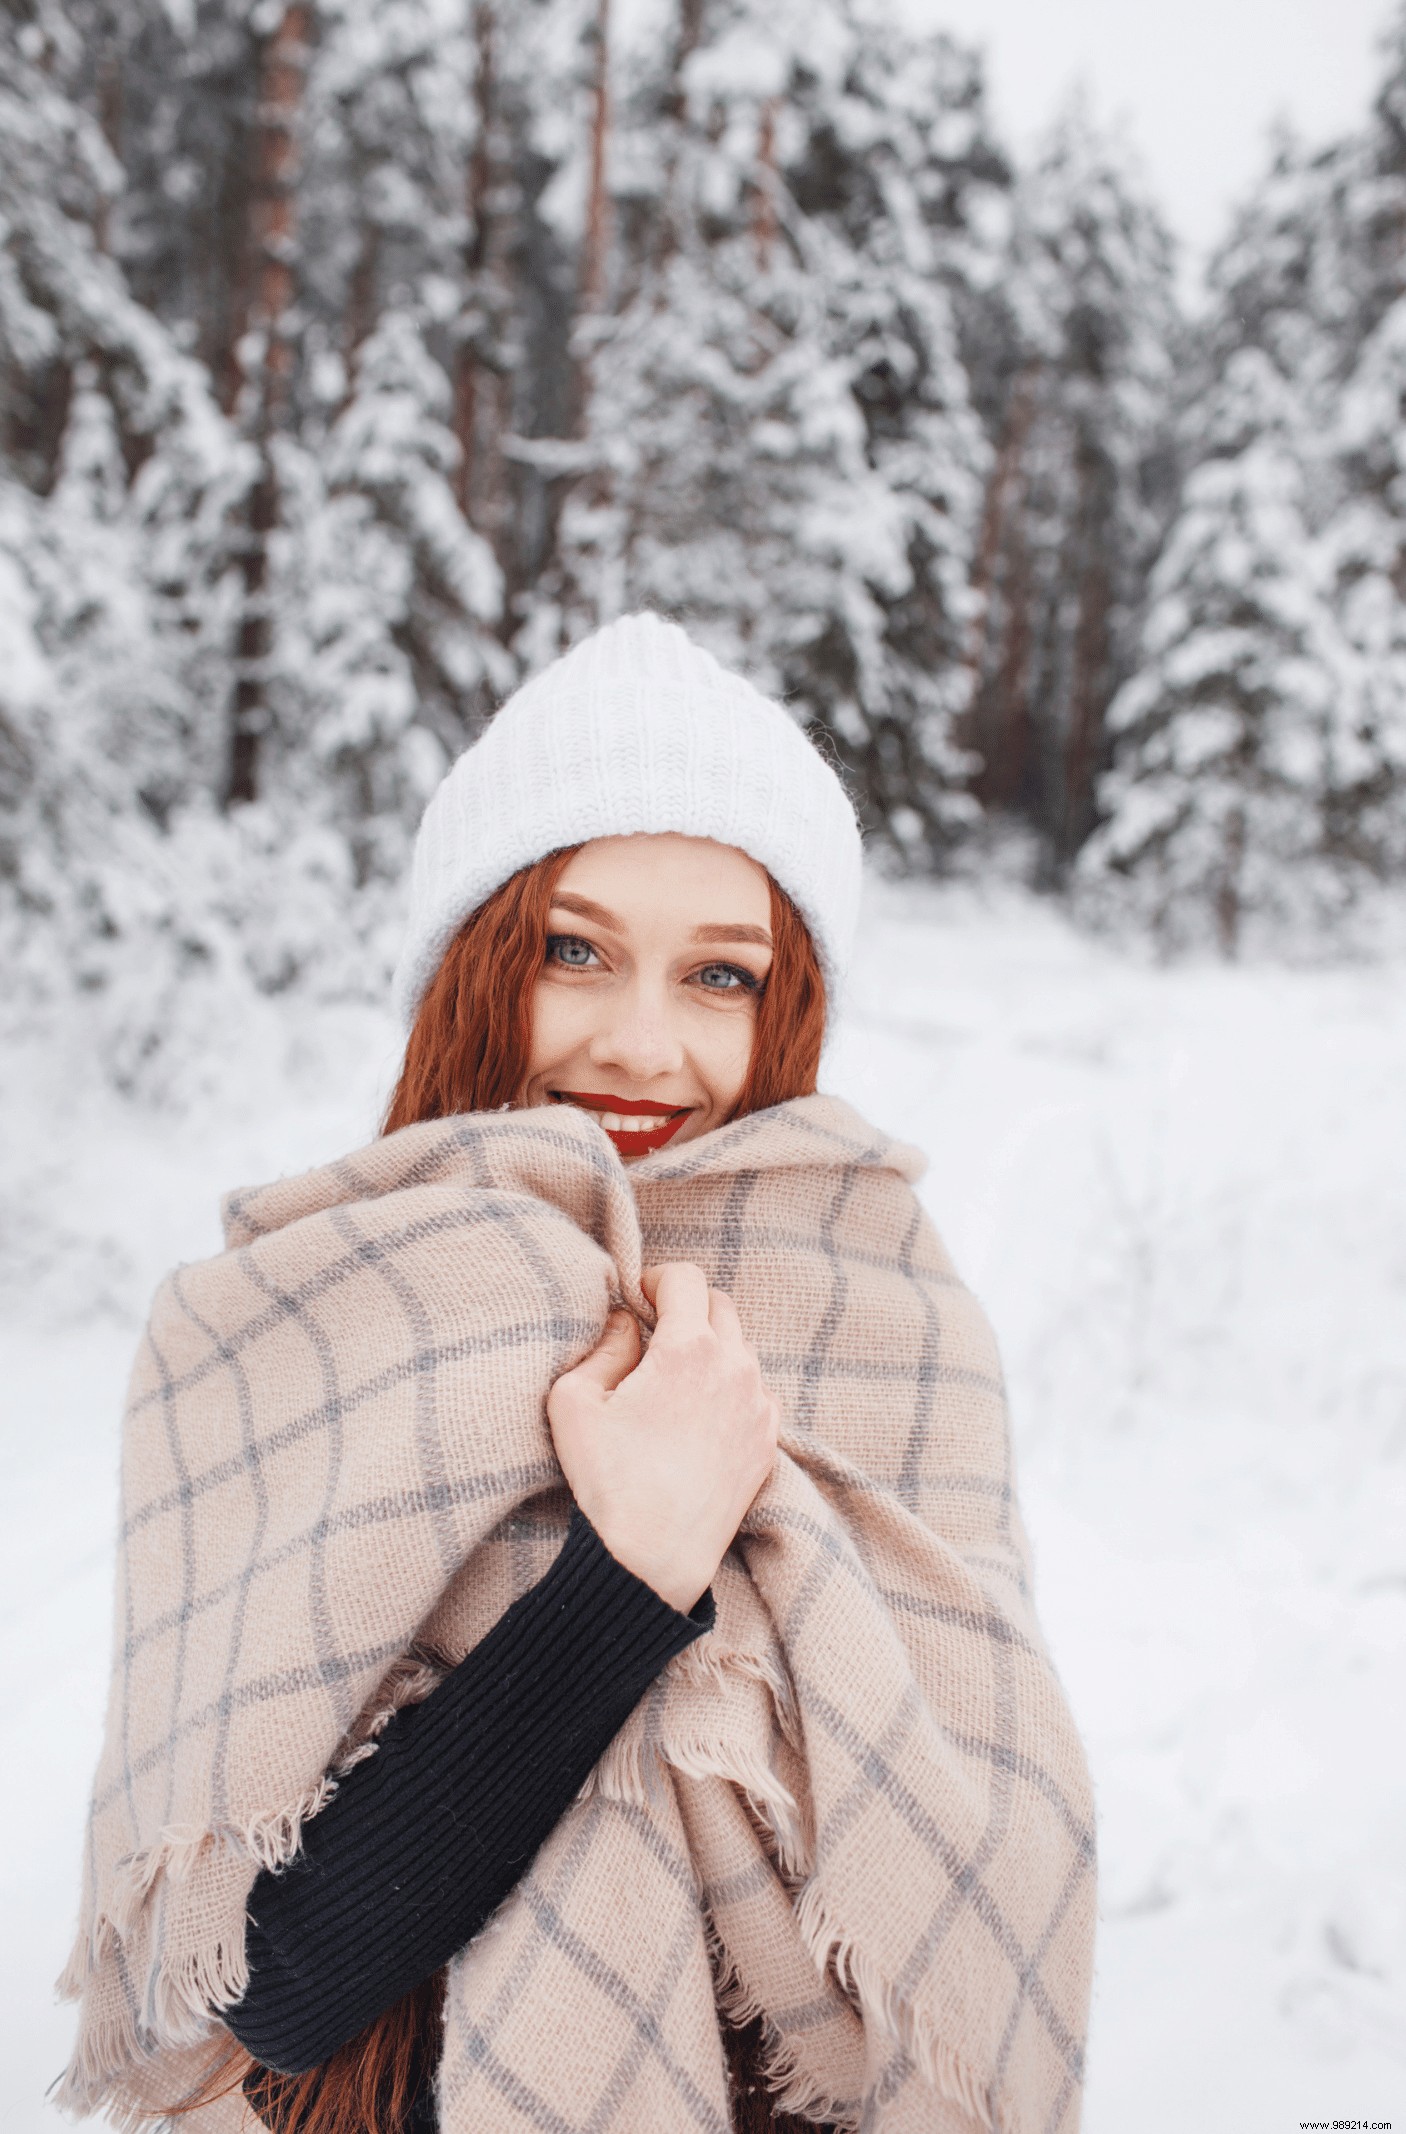 How to take care of your hair in winter? 